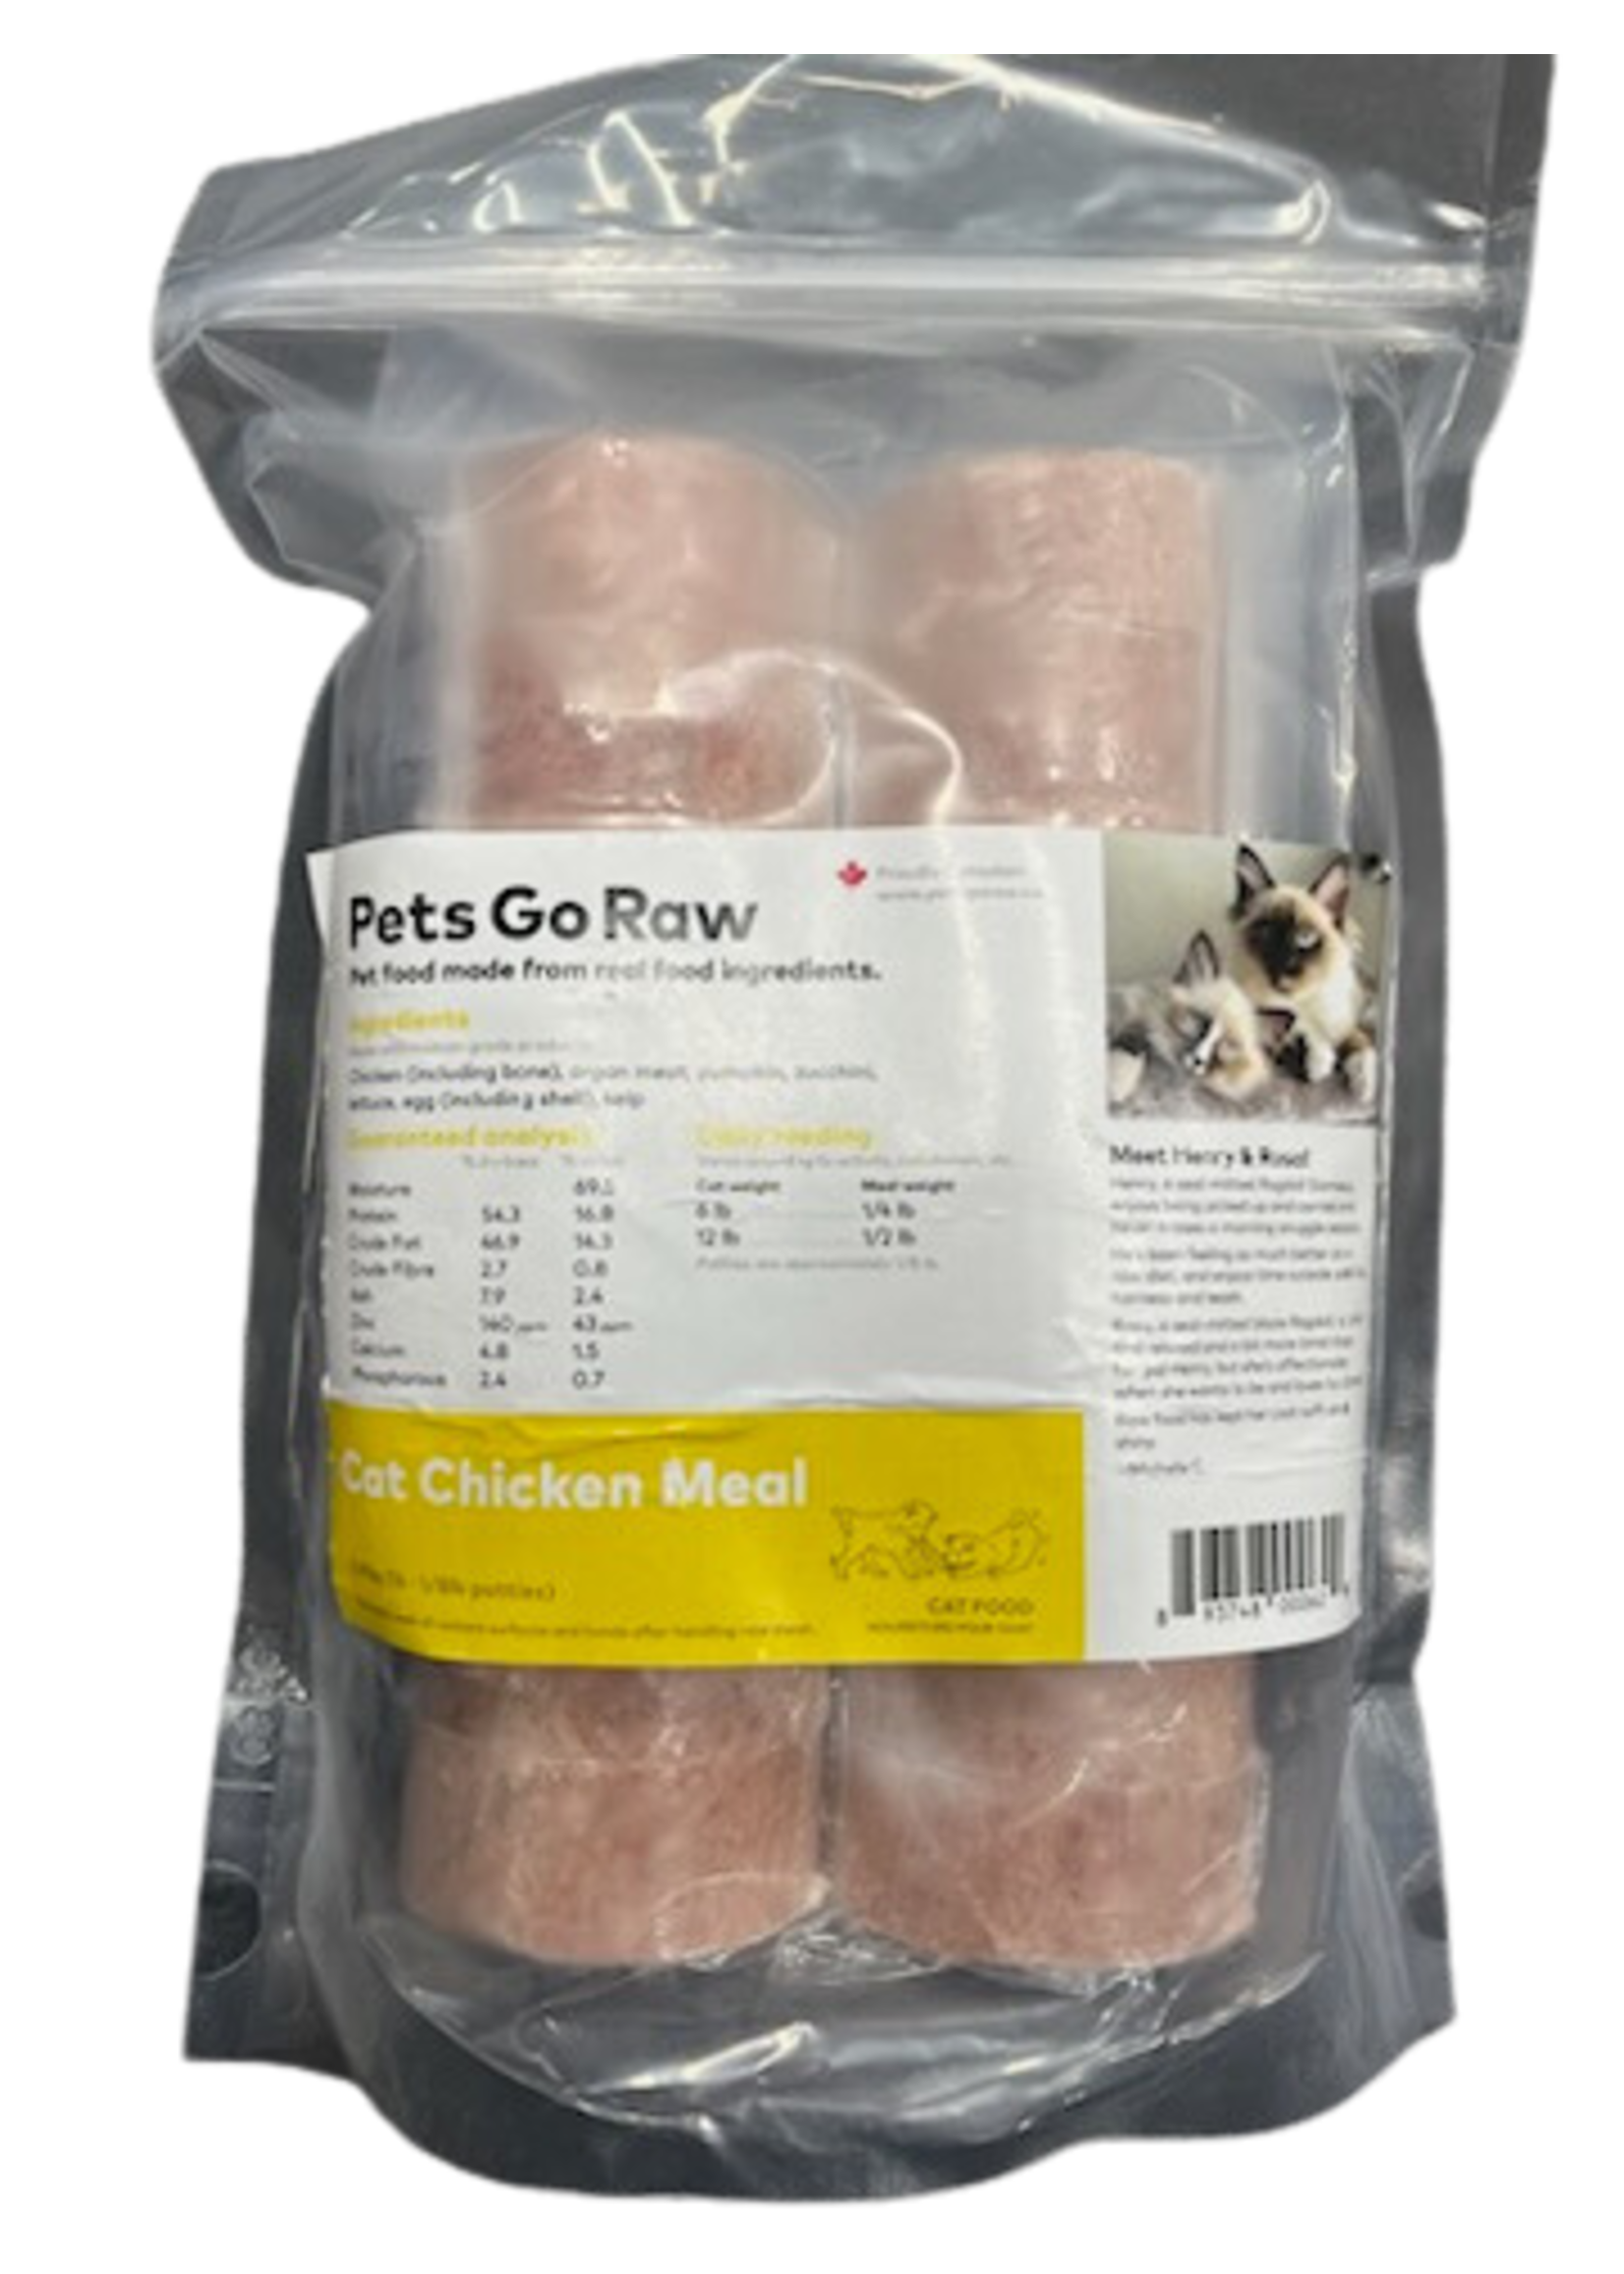 Pets Go Raw Pets Go Raw Cat Chicken Meal 1/8lb (2lbs)